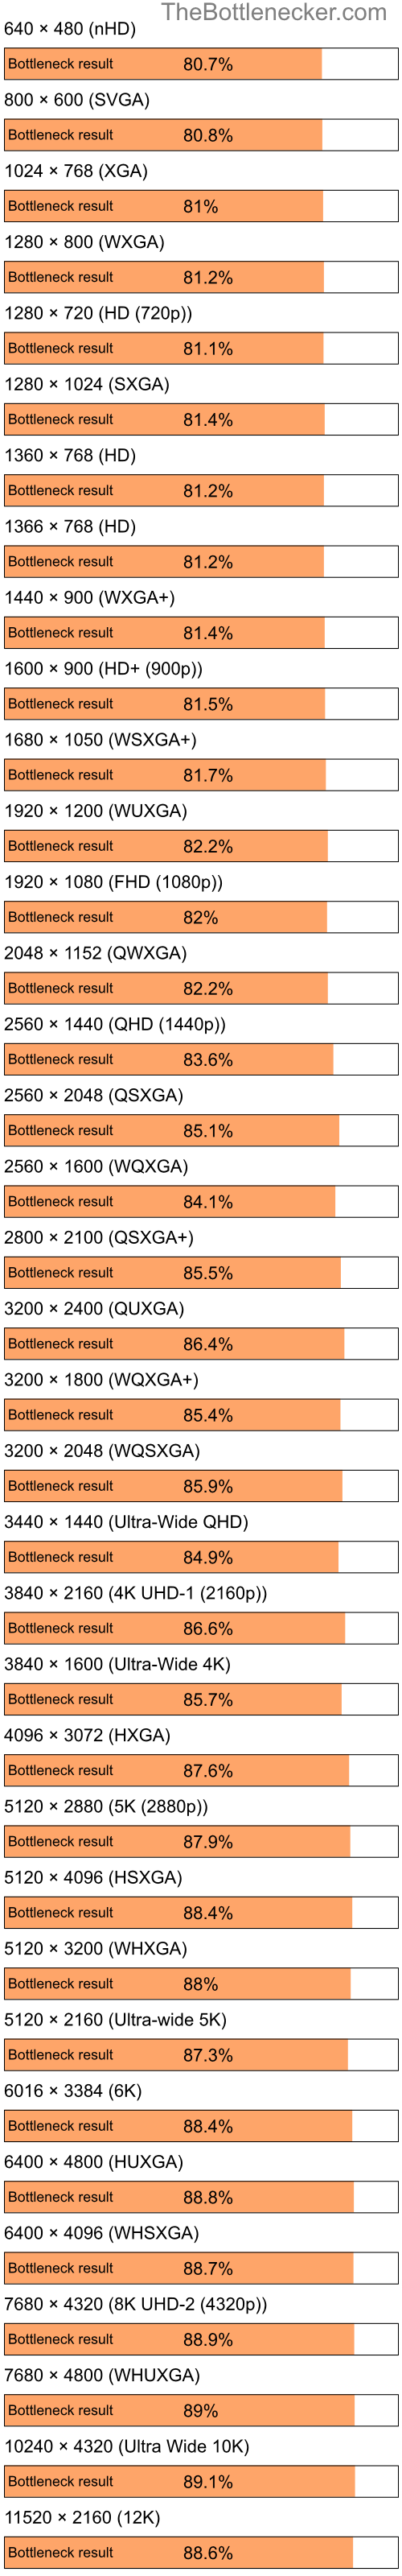 Bottleneck results by resolution for Intel Pentium 4 and AMD Mobility Radeon X1350 in Graphic Card Intense Tasks